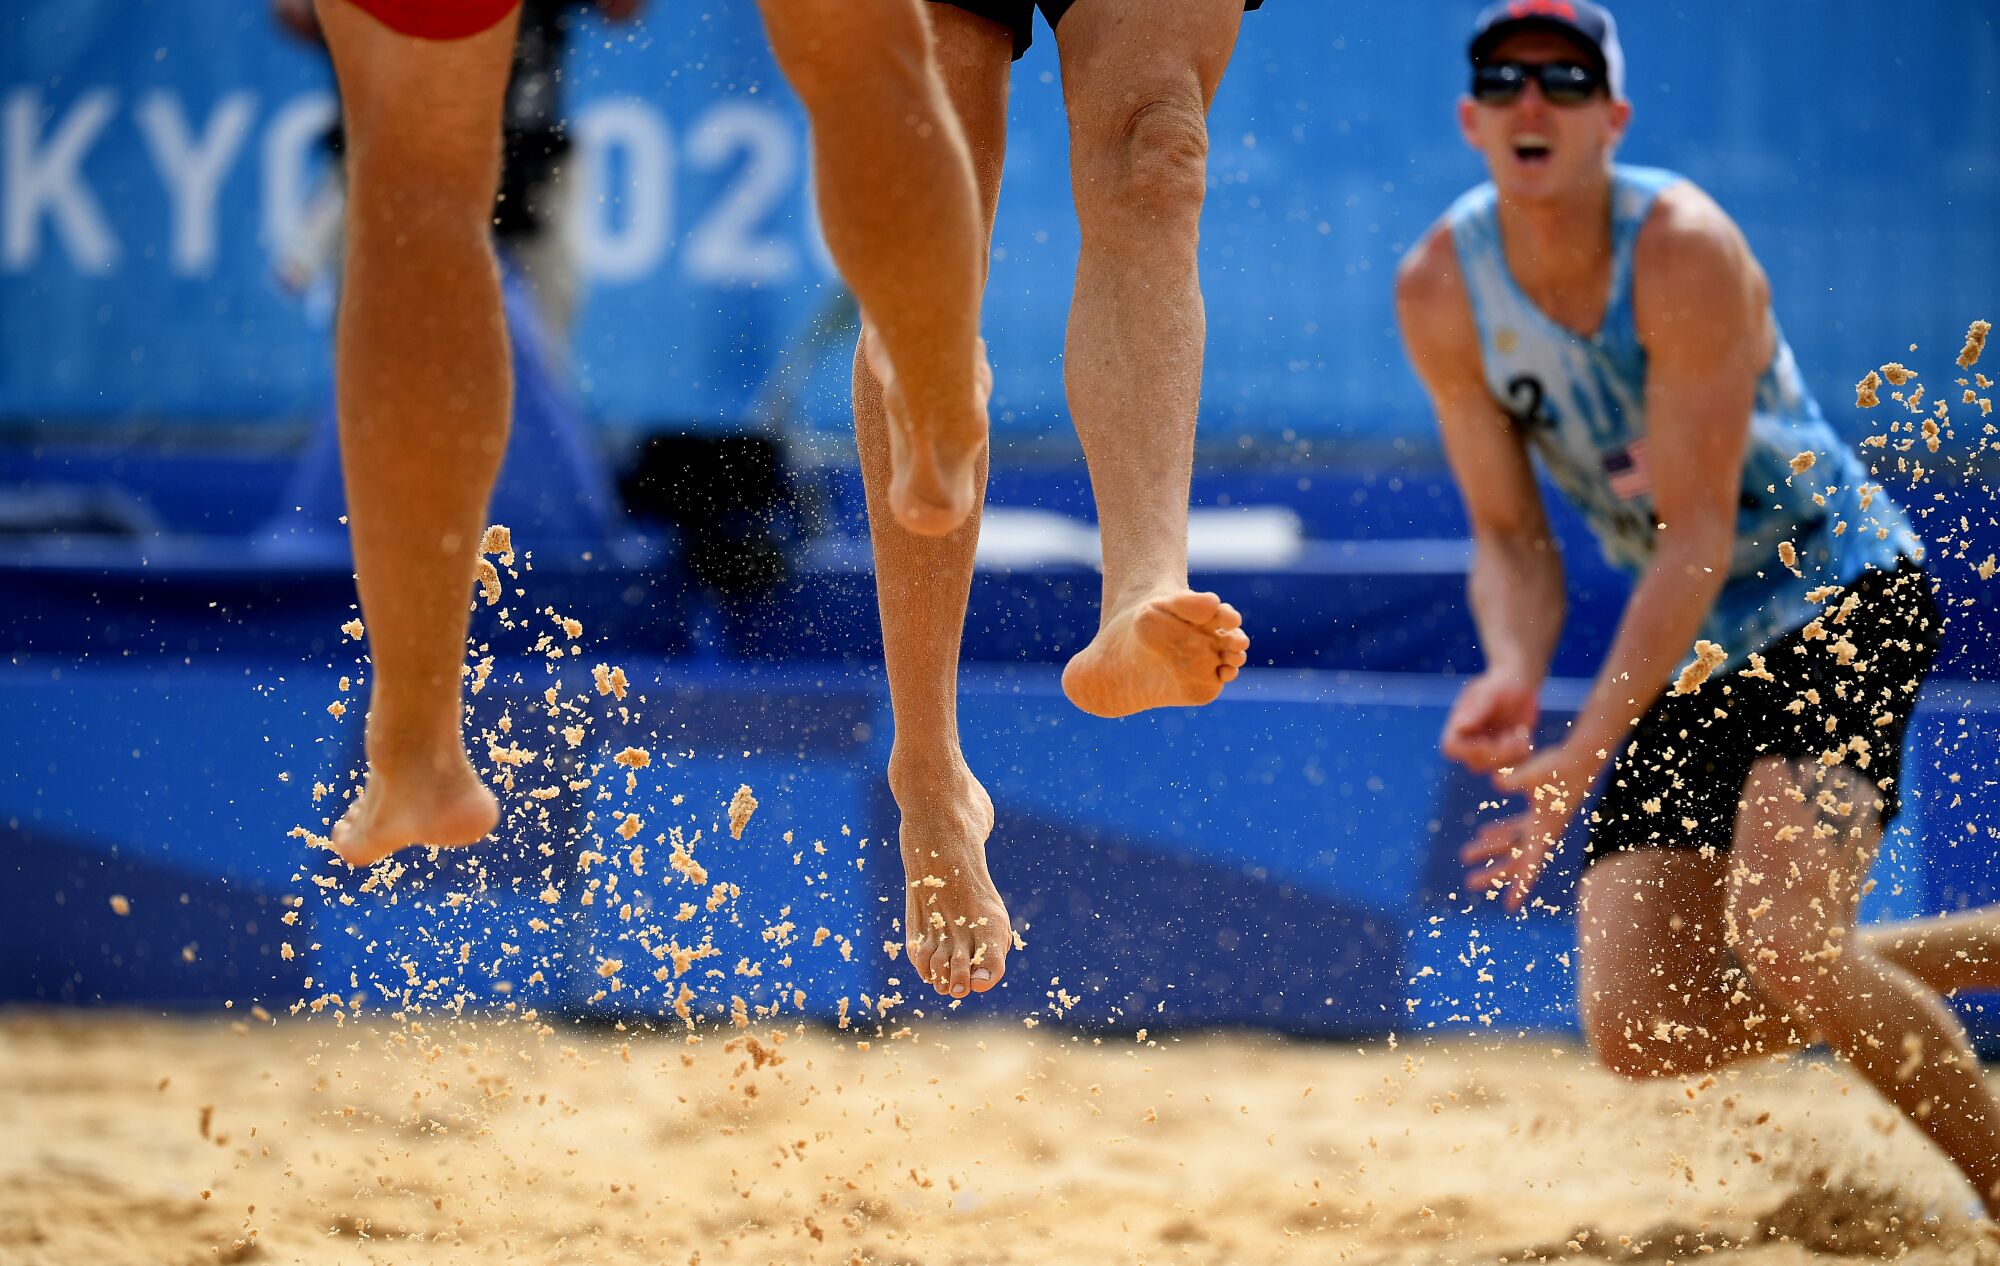 Tri Bourne runs across the sand behind two sets of airborne legs.